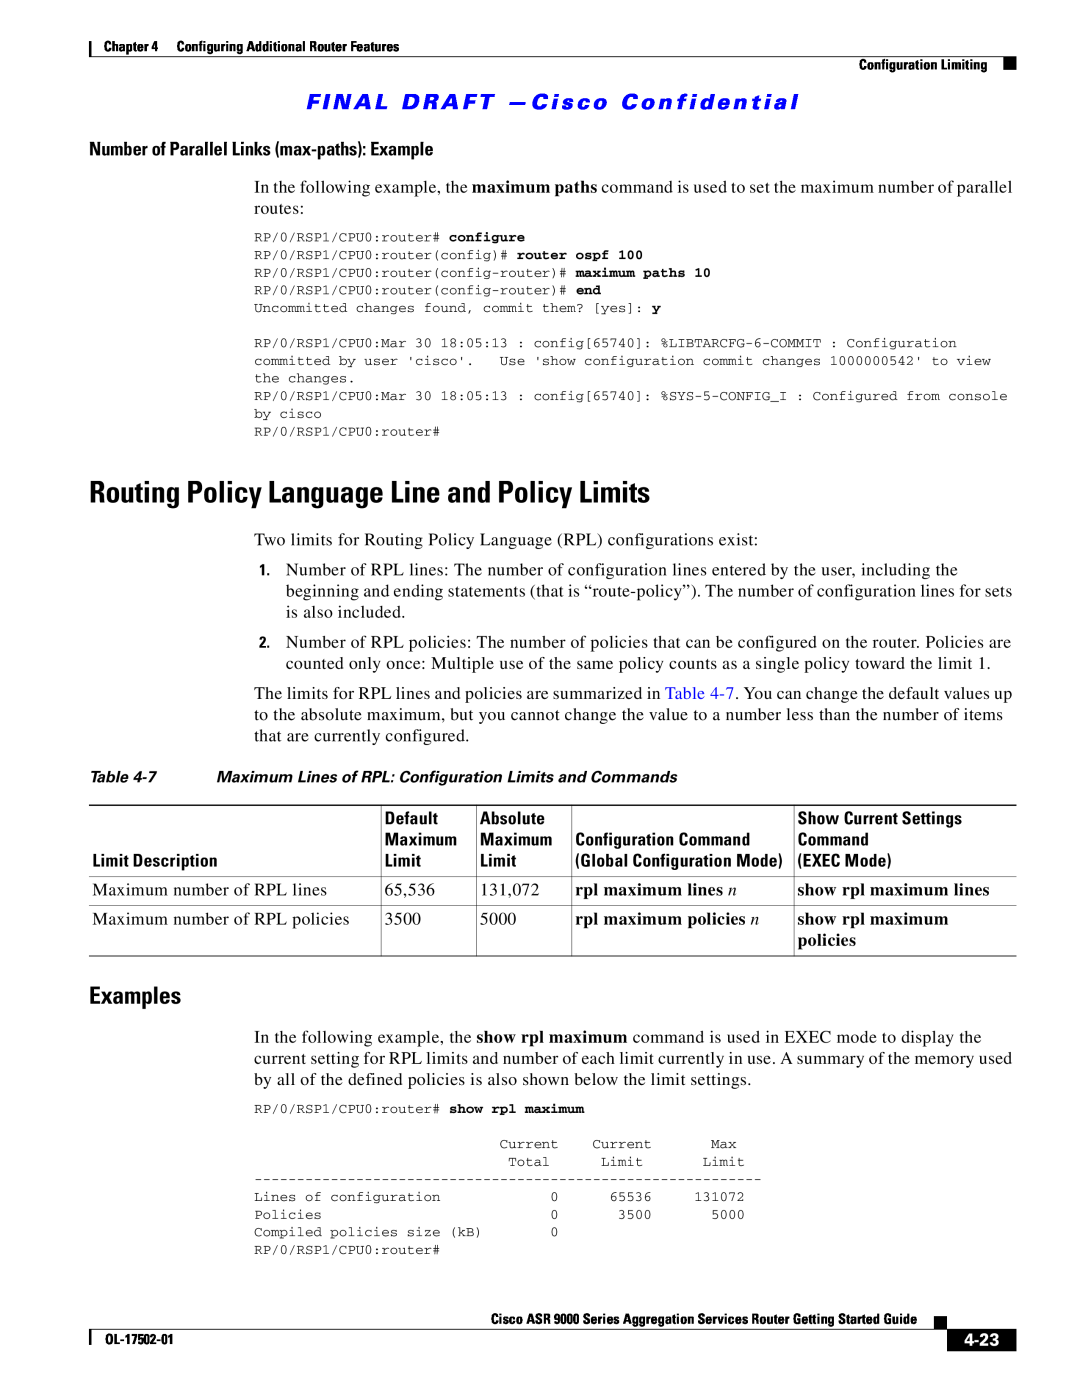 Cisco Systems ASR 9000 Routing Policy Language Line and Policy Limits, Number of Parallel Links max-paths Example, 65,536 